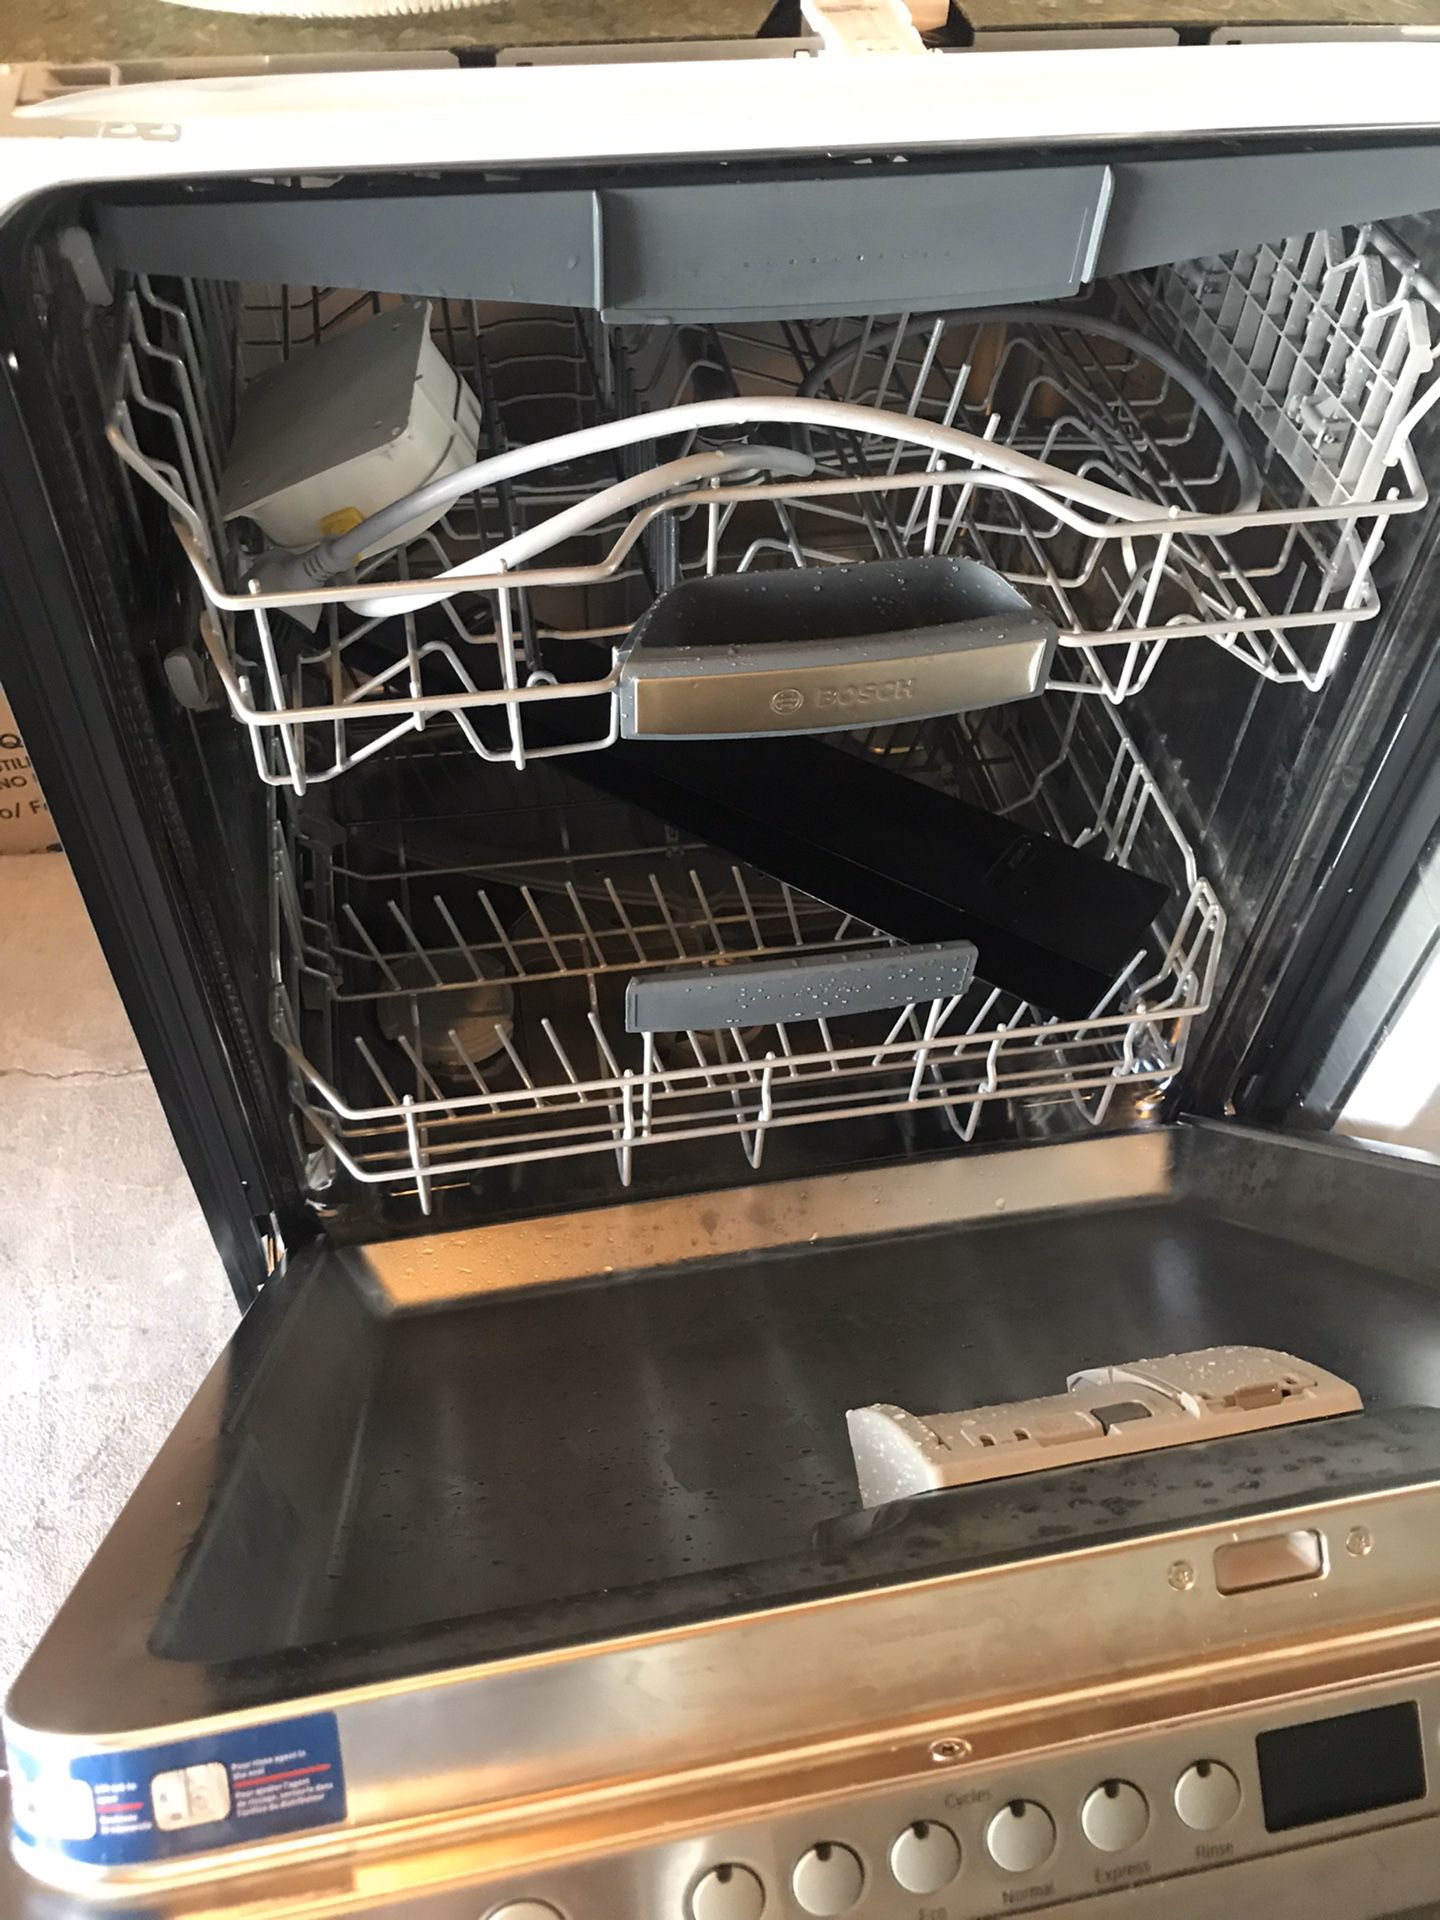 Still new dishwasher stainless steel for parts or repair